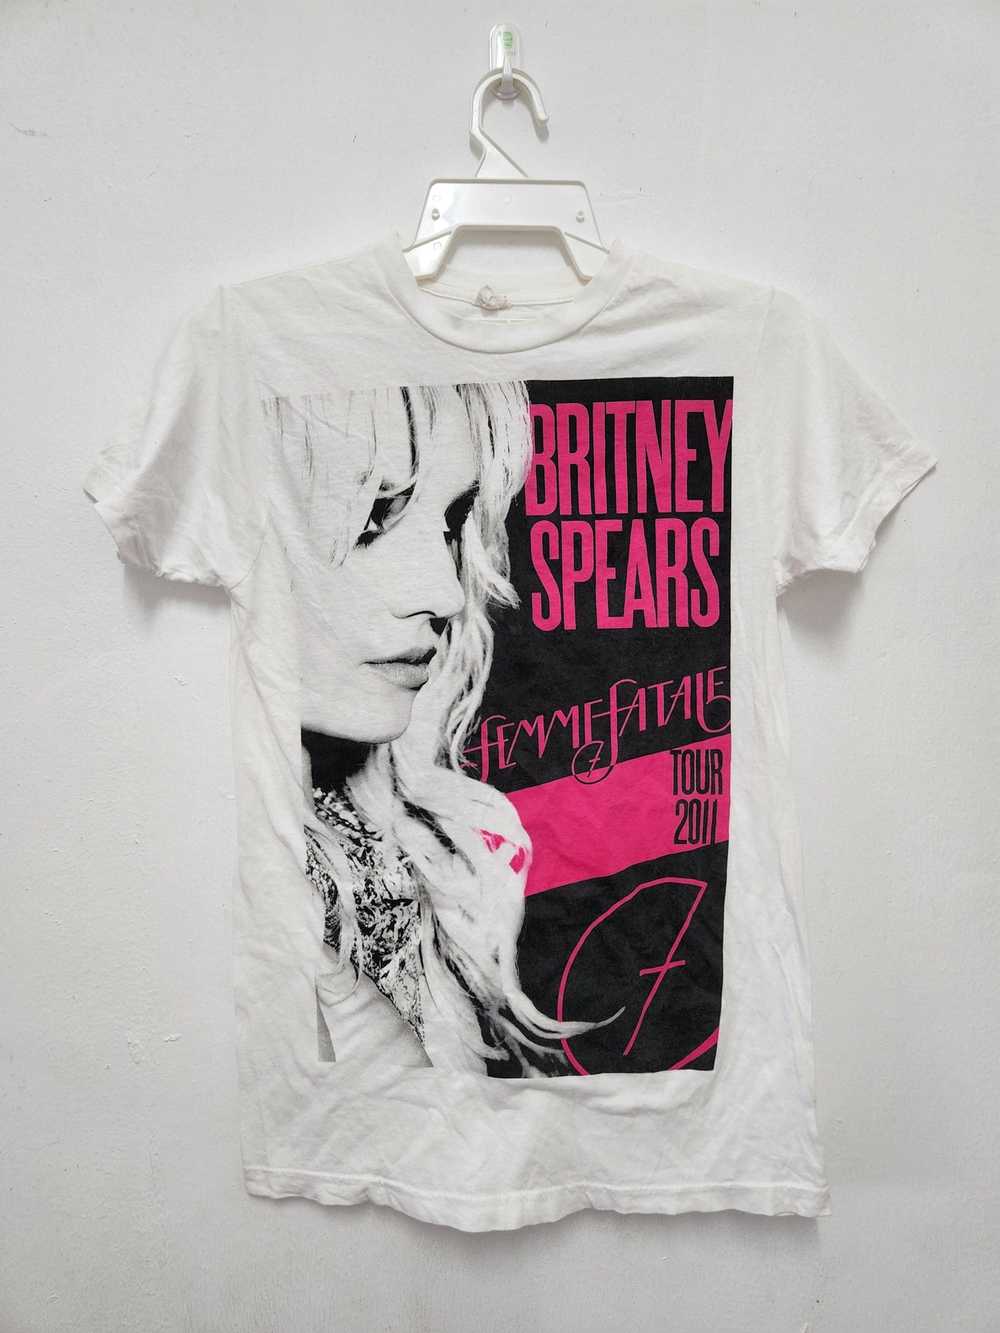 Band Tees Britney Spears 2011 Tour - image 1